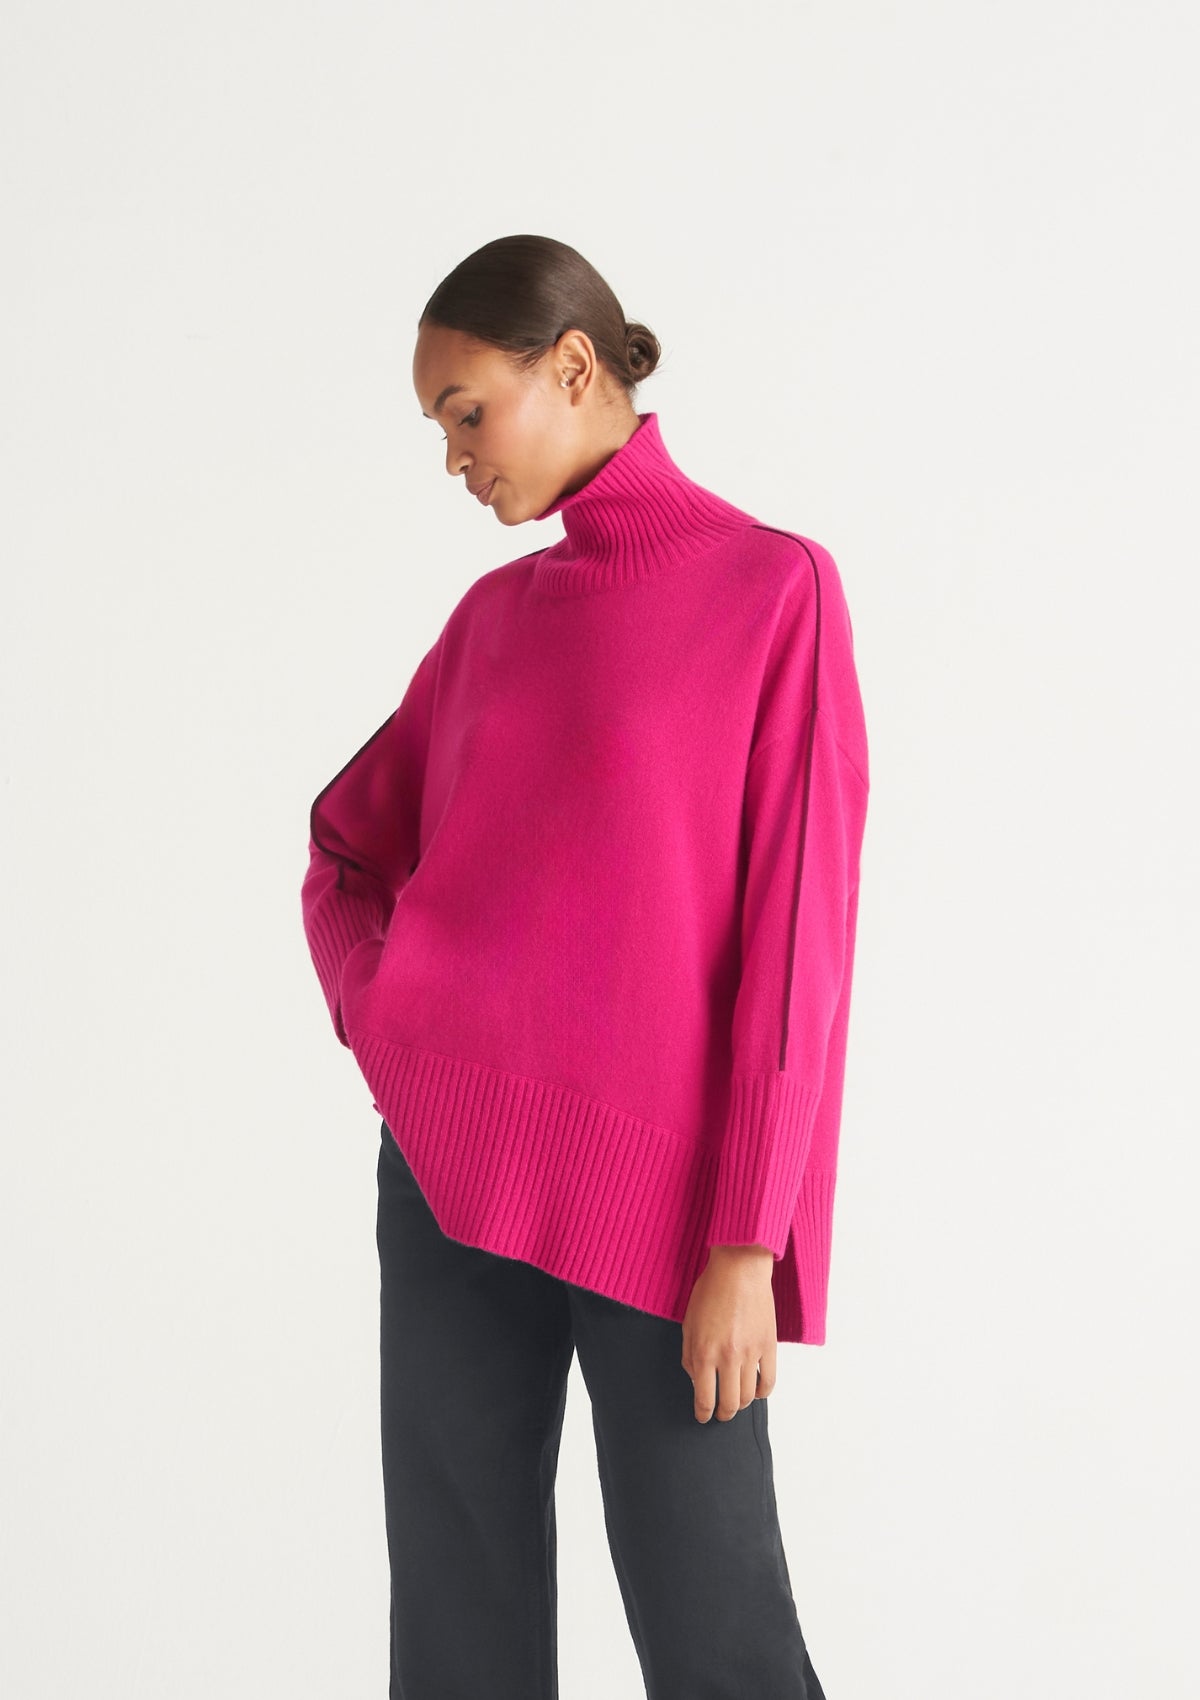 Contrast Trim Polo Neck Sweater in Cherry Pink/Barolo Red